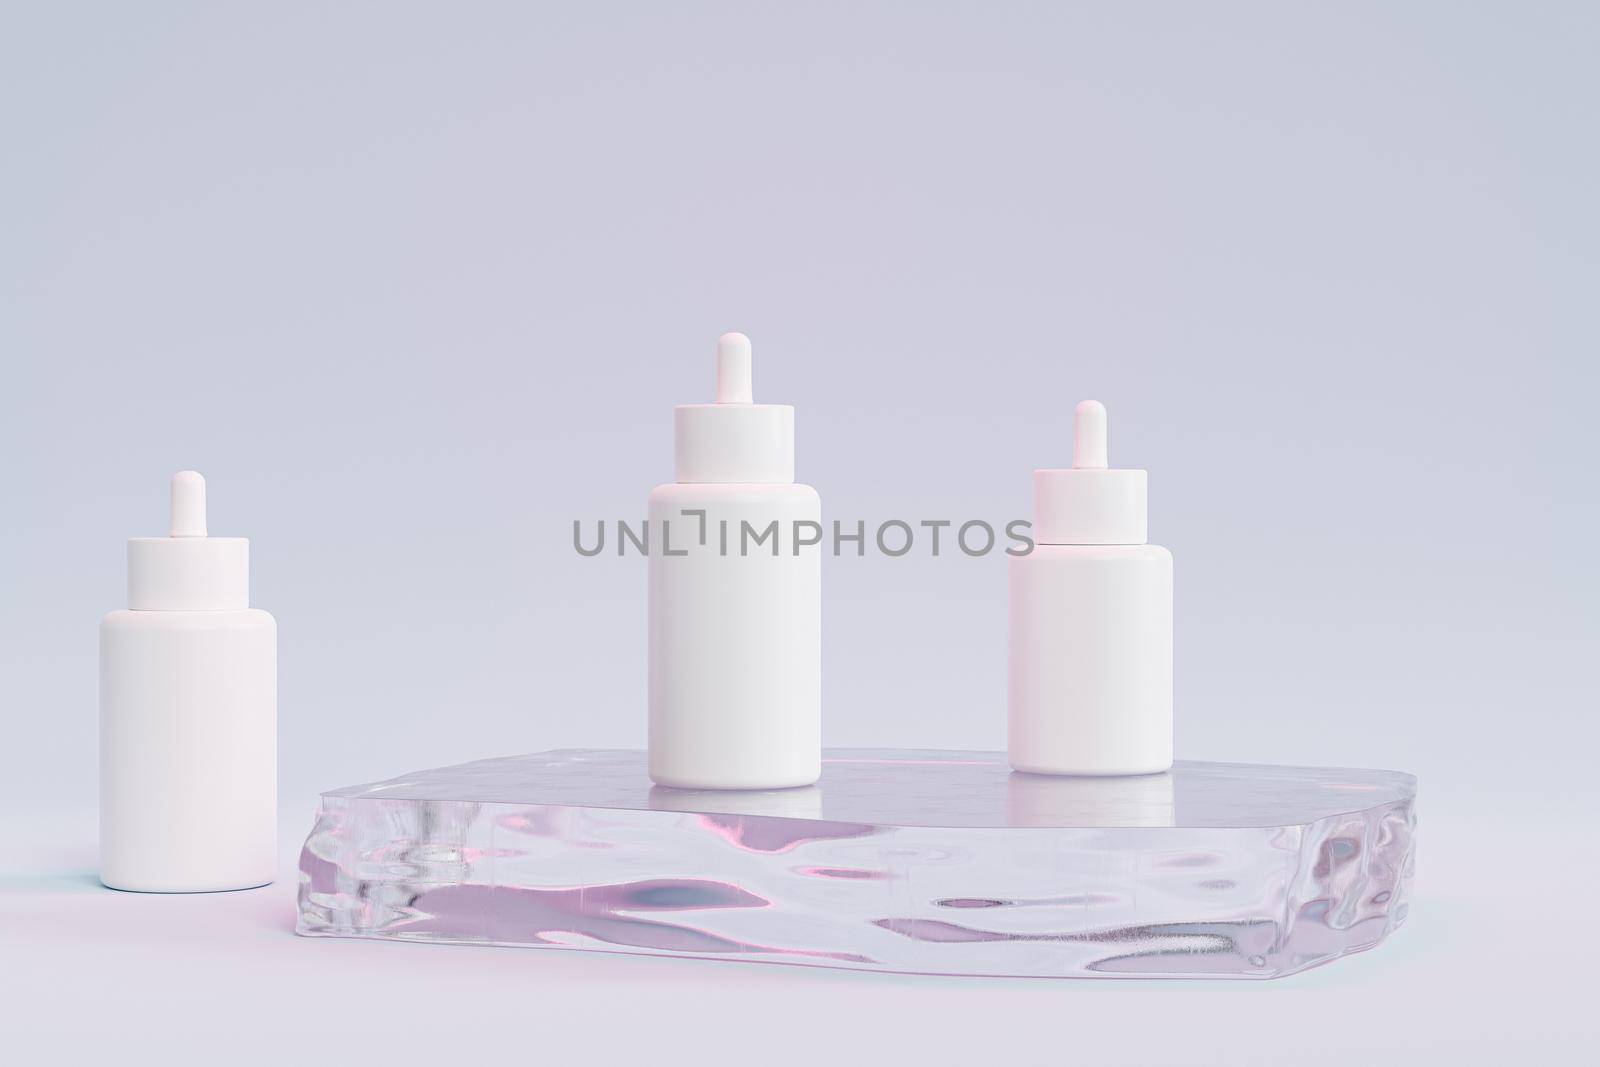 Mockup dropper bottles for cosmetics products or advertising on glass podium, 3d illustration render